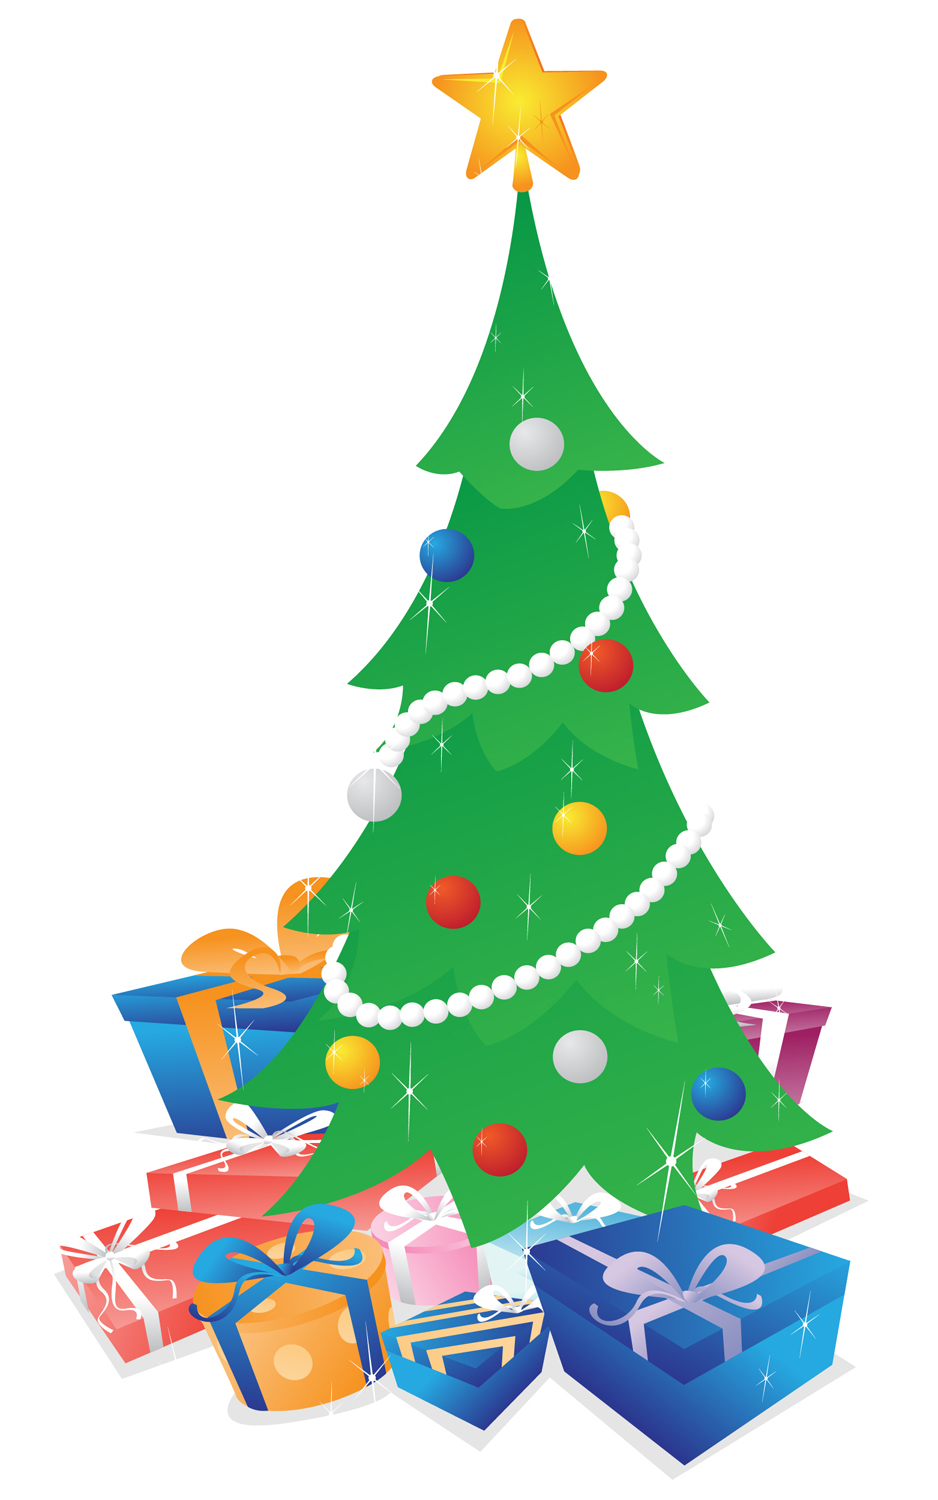 Christmas Tree With Presents Vector Illustration Of A Shimmering